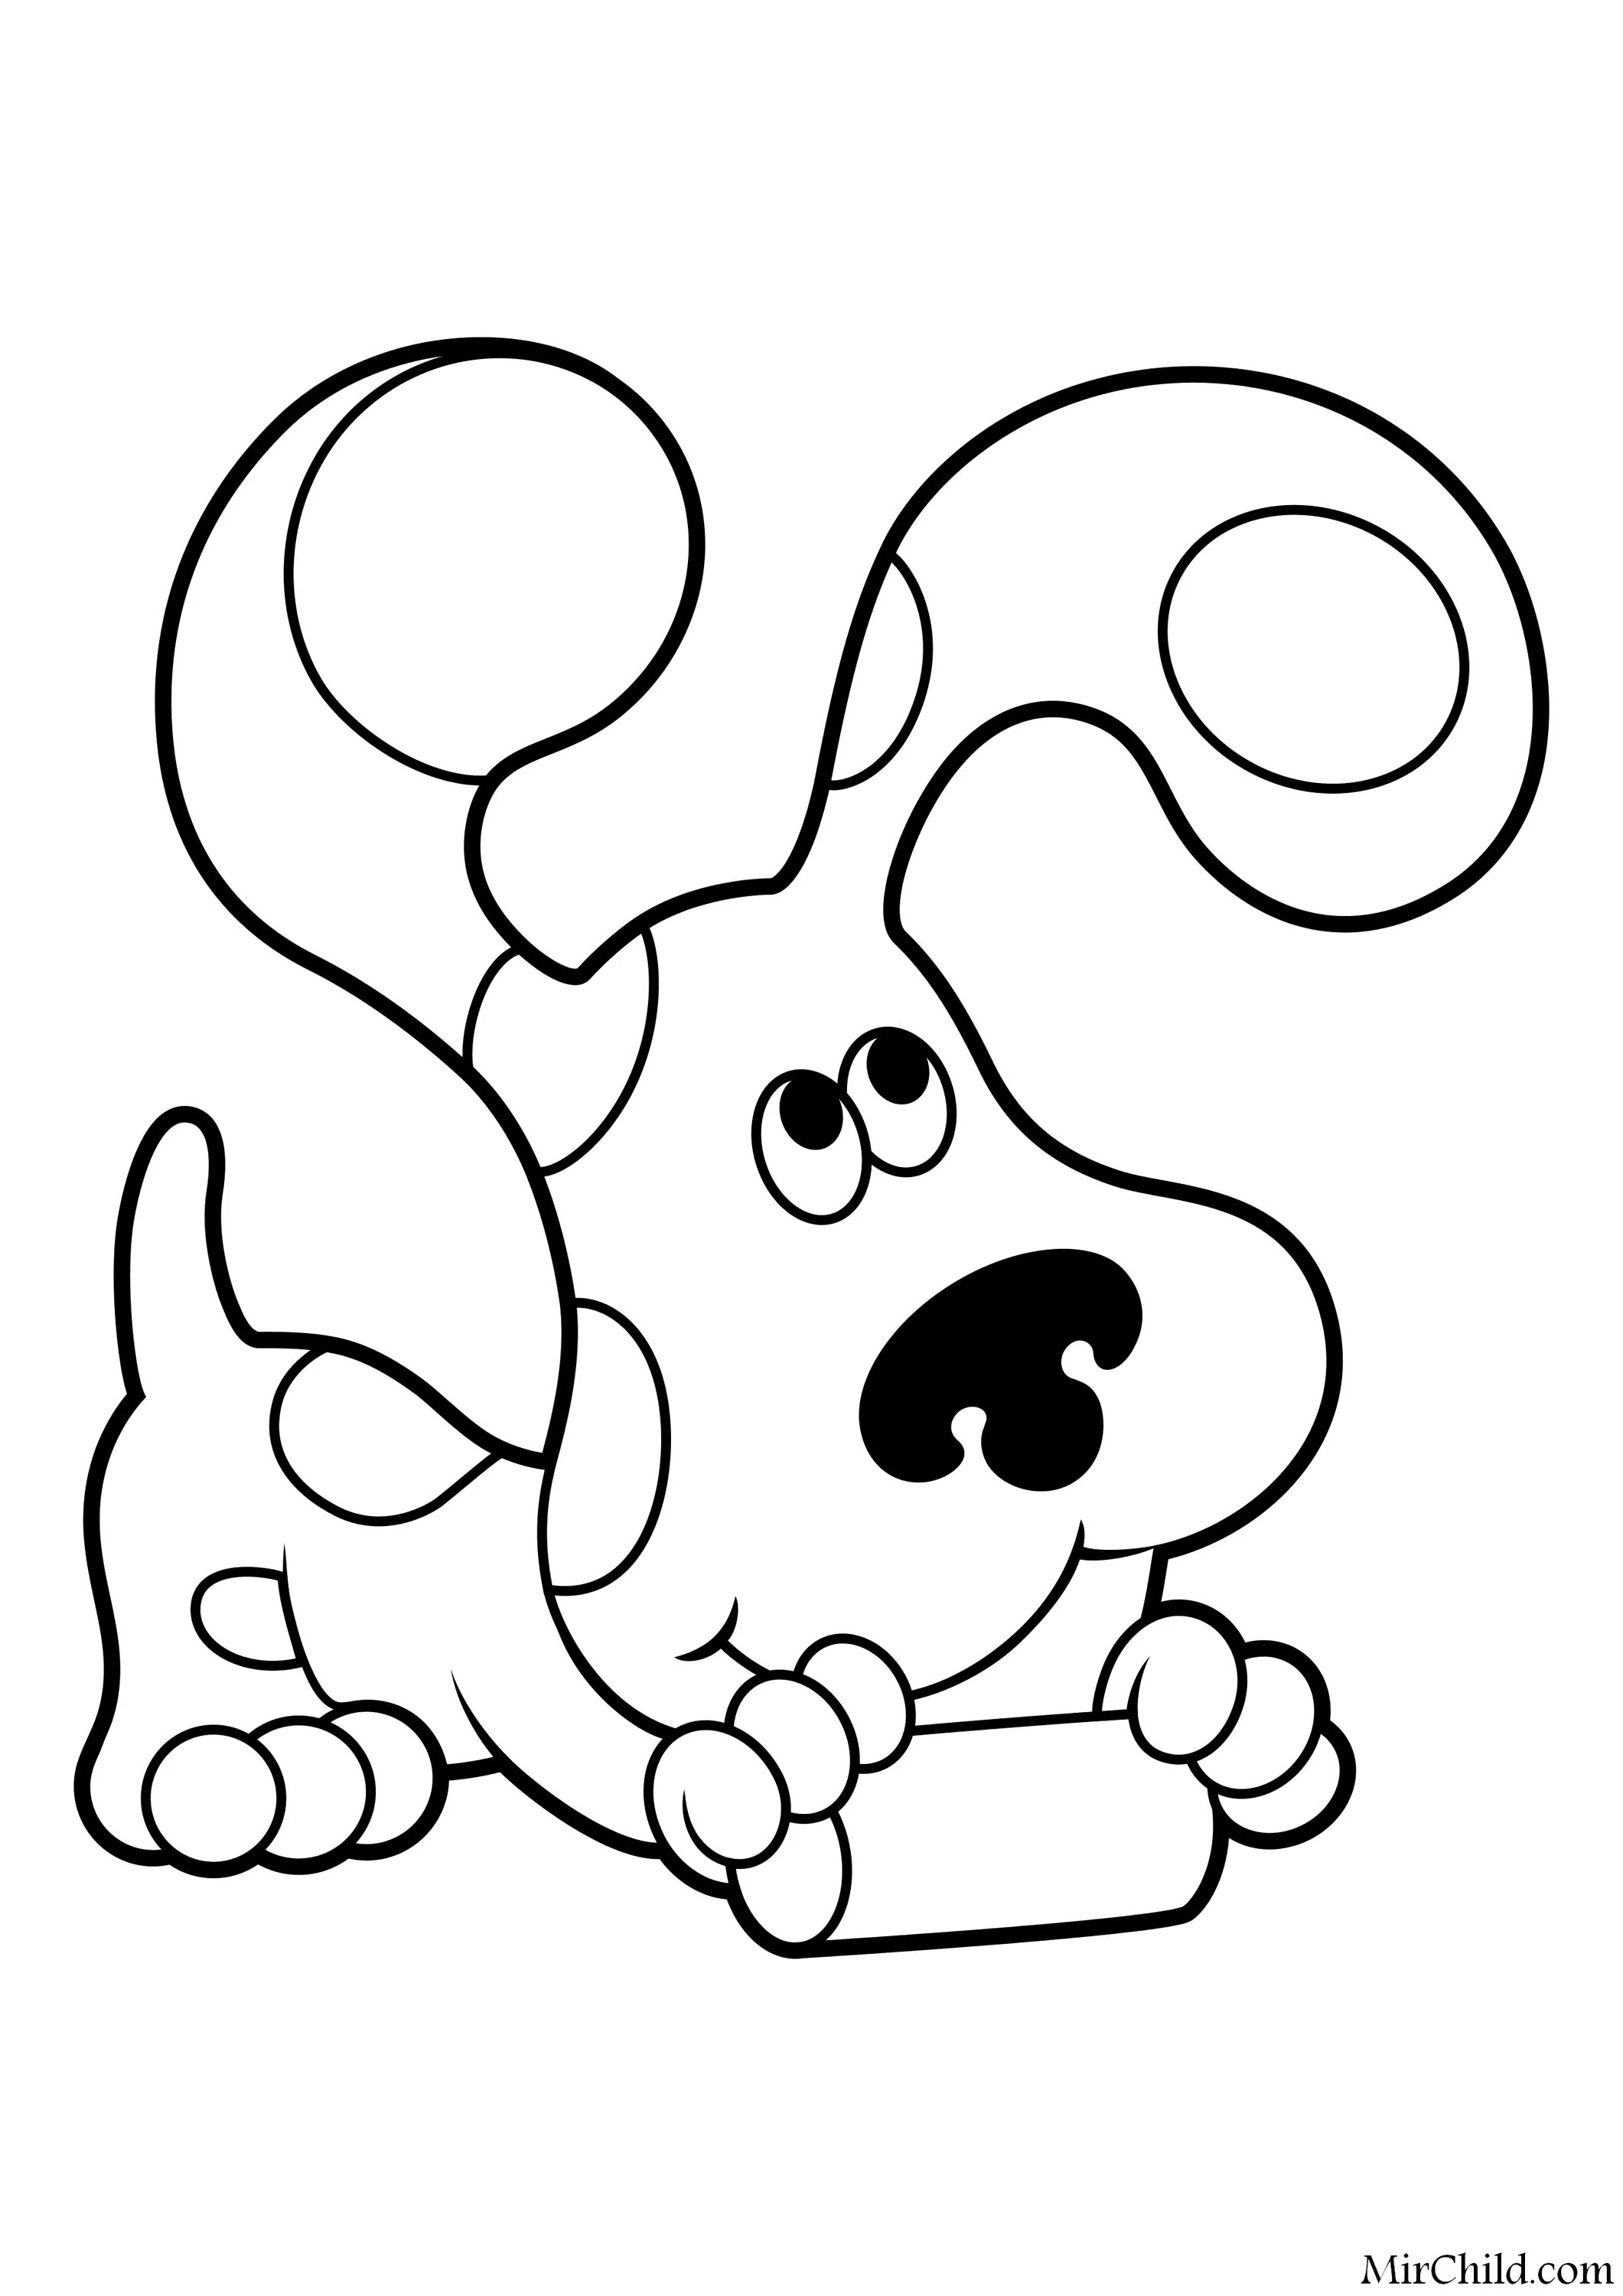 Coloring page grinning blue puppy